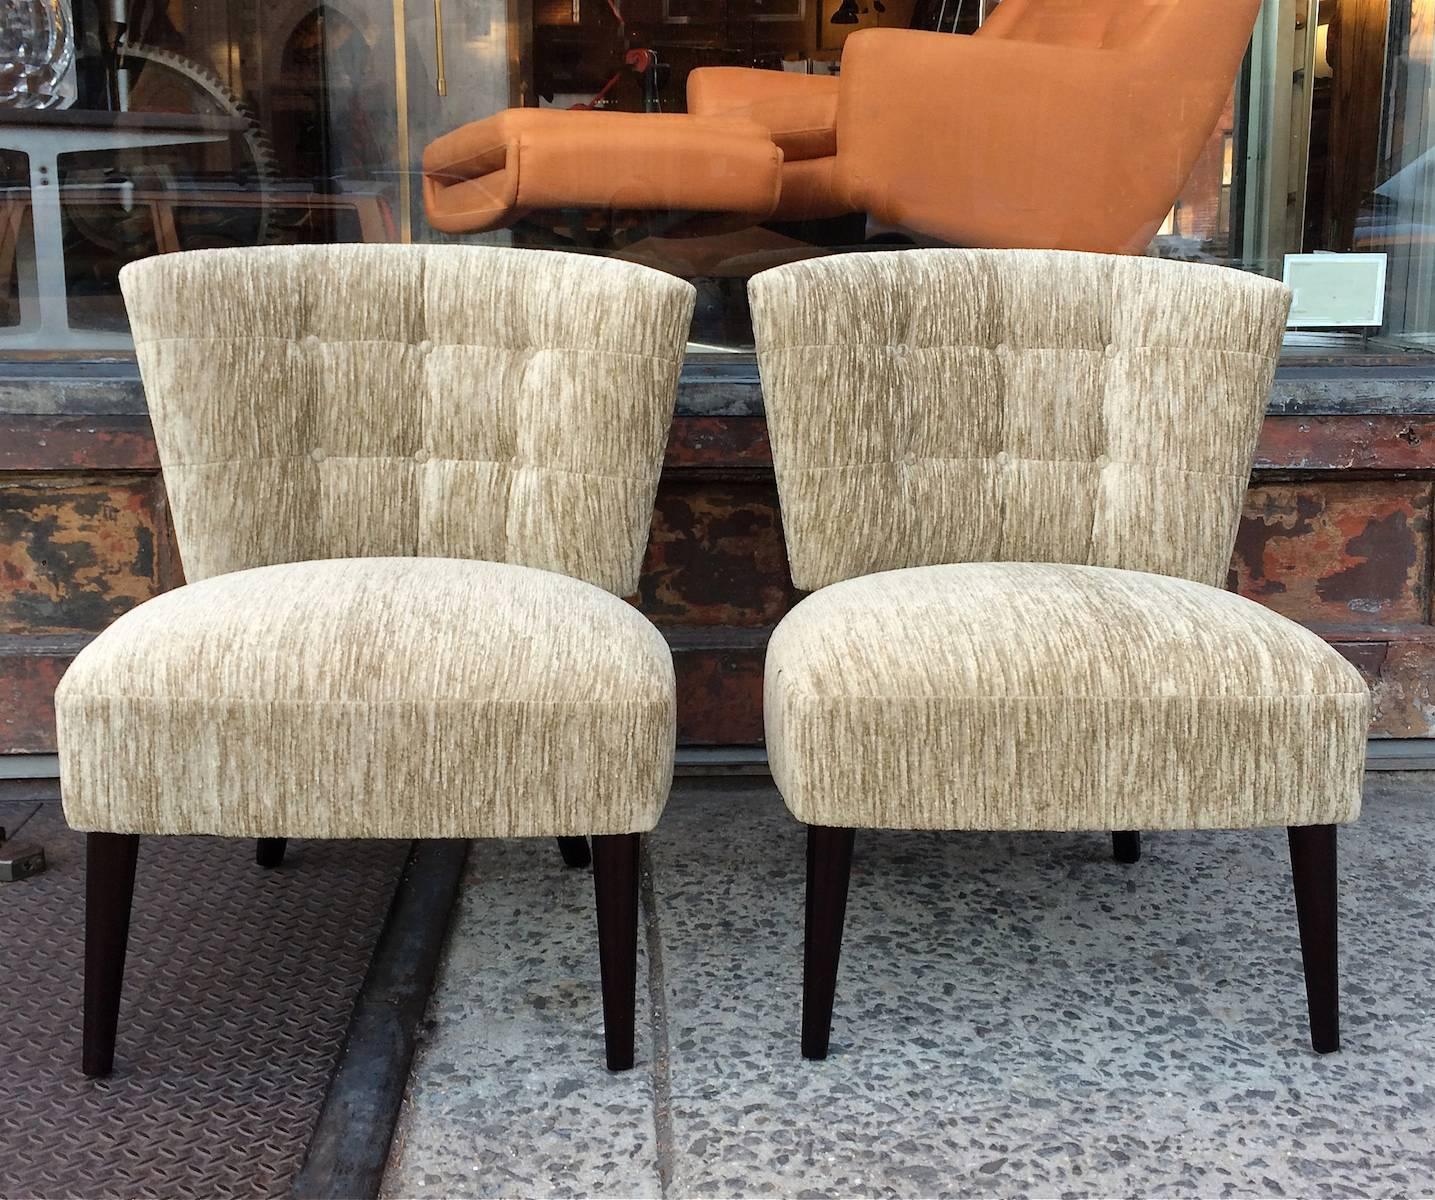 Pair of vintage, Mid-Century, Hollywood Regency, slipper chairs by Kroehler, upholstered in sumptuously textured, celery color velvet with lacquered rosewood legs.